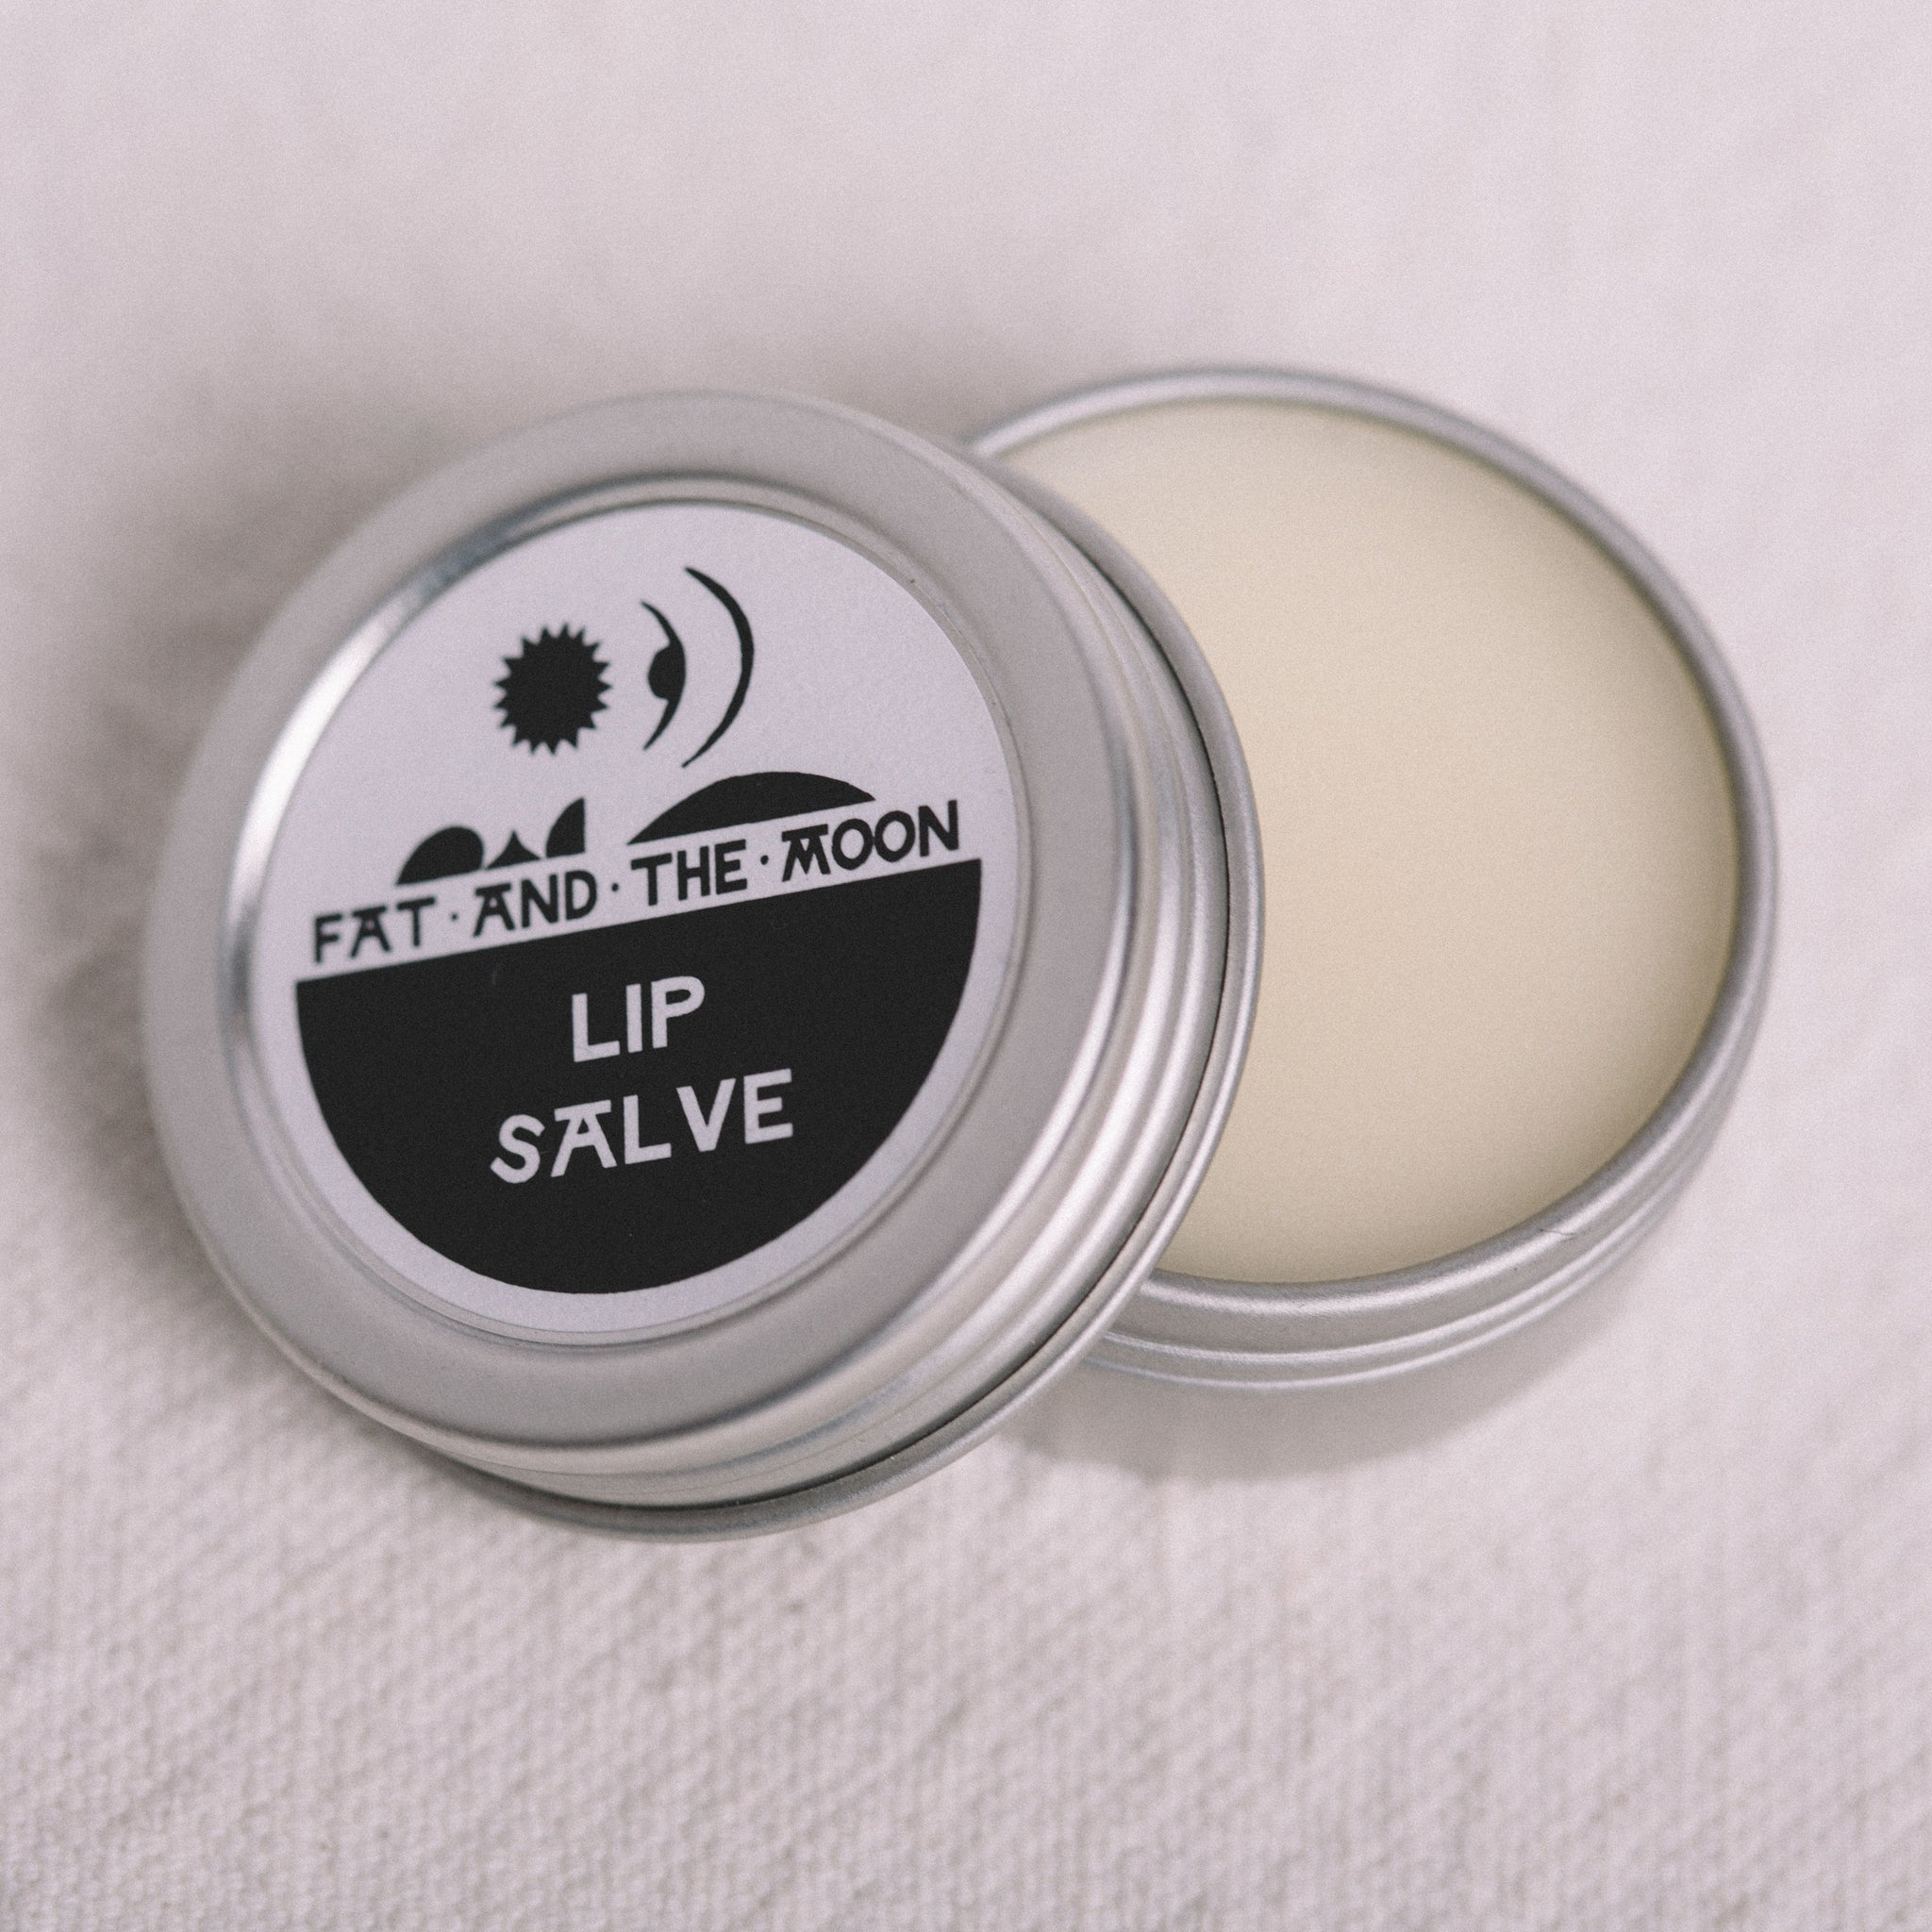 LIP SALVE || FAT AND THE MOON